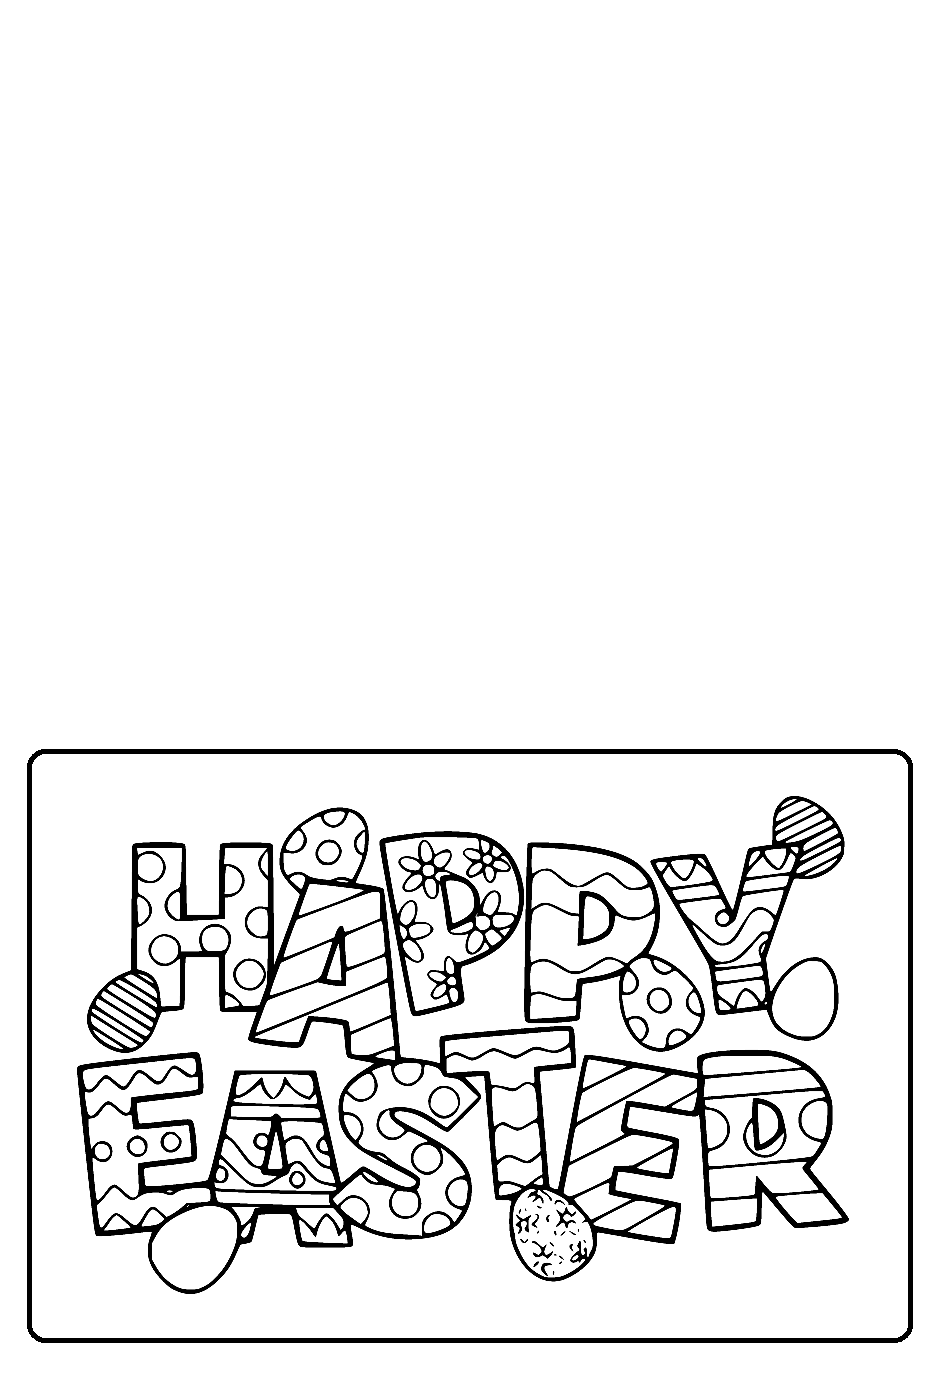 Printable Happy Easter Doodle Card Coloring Page